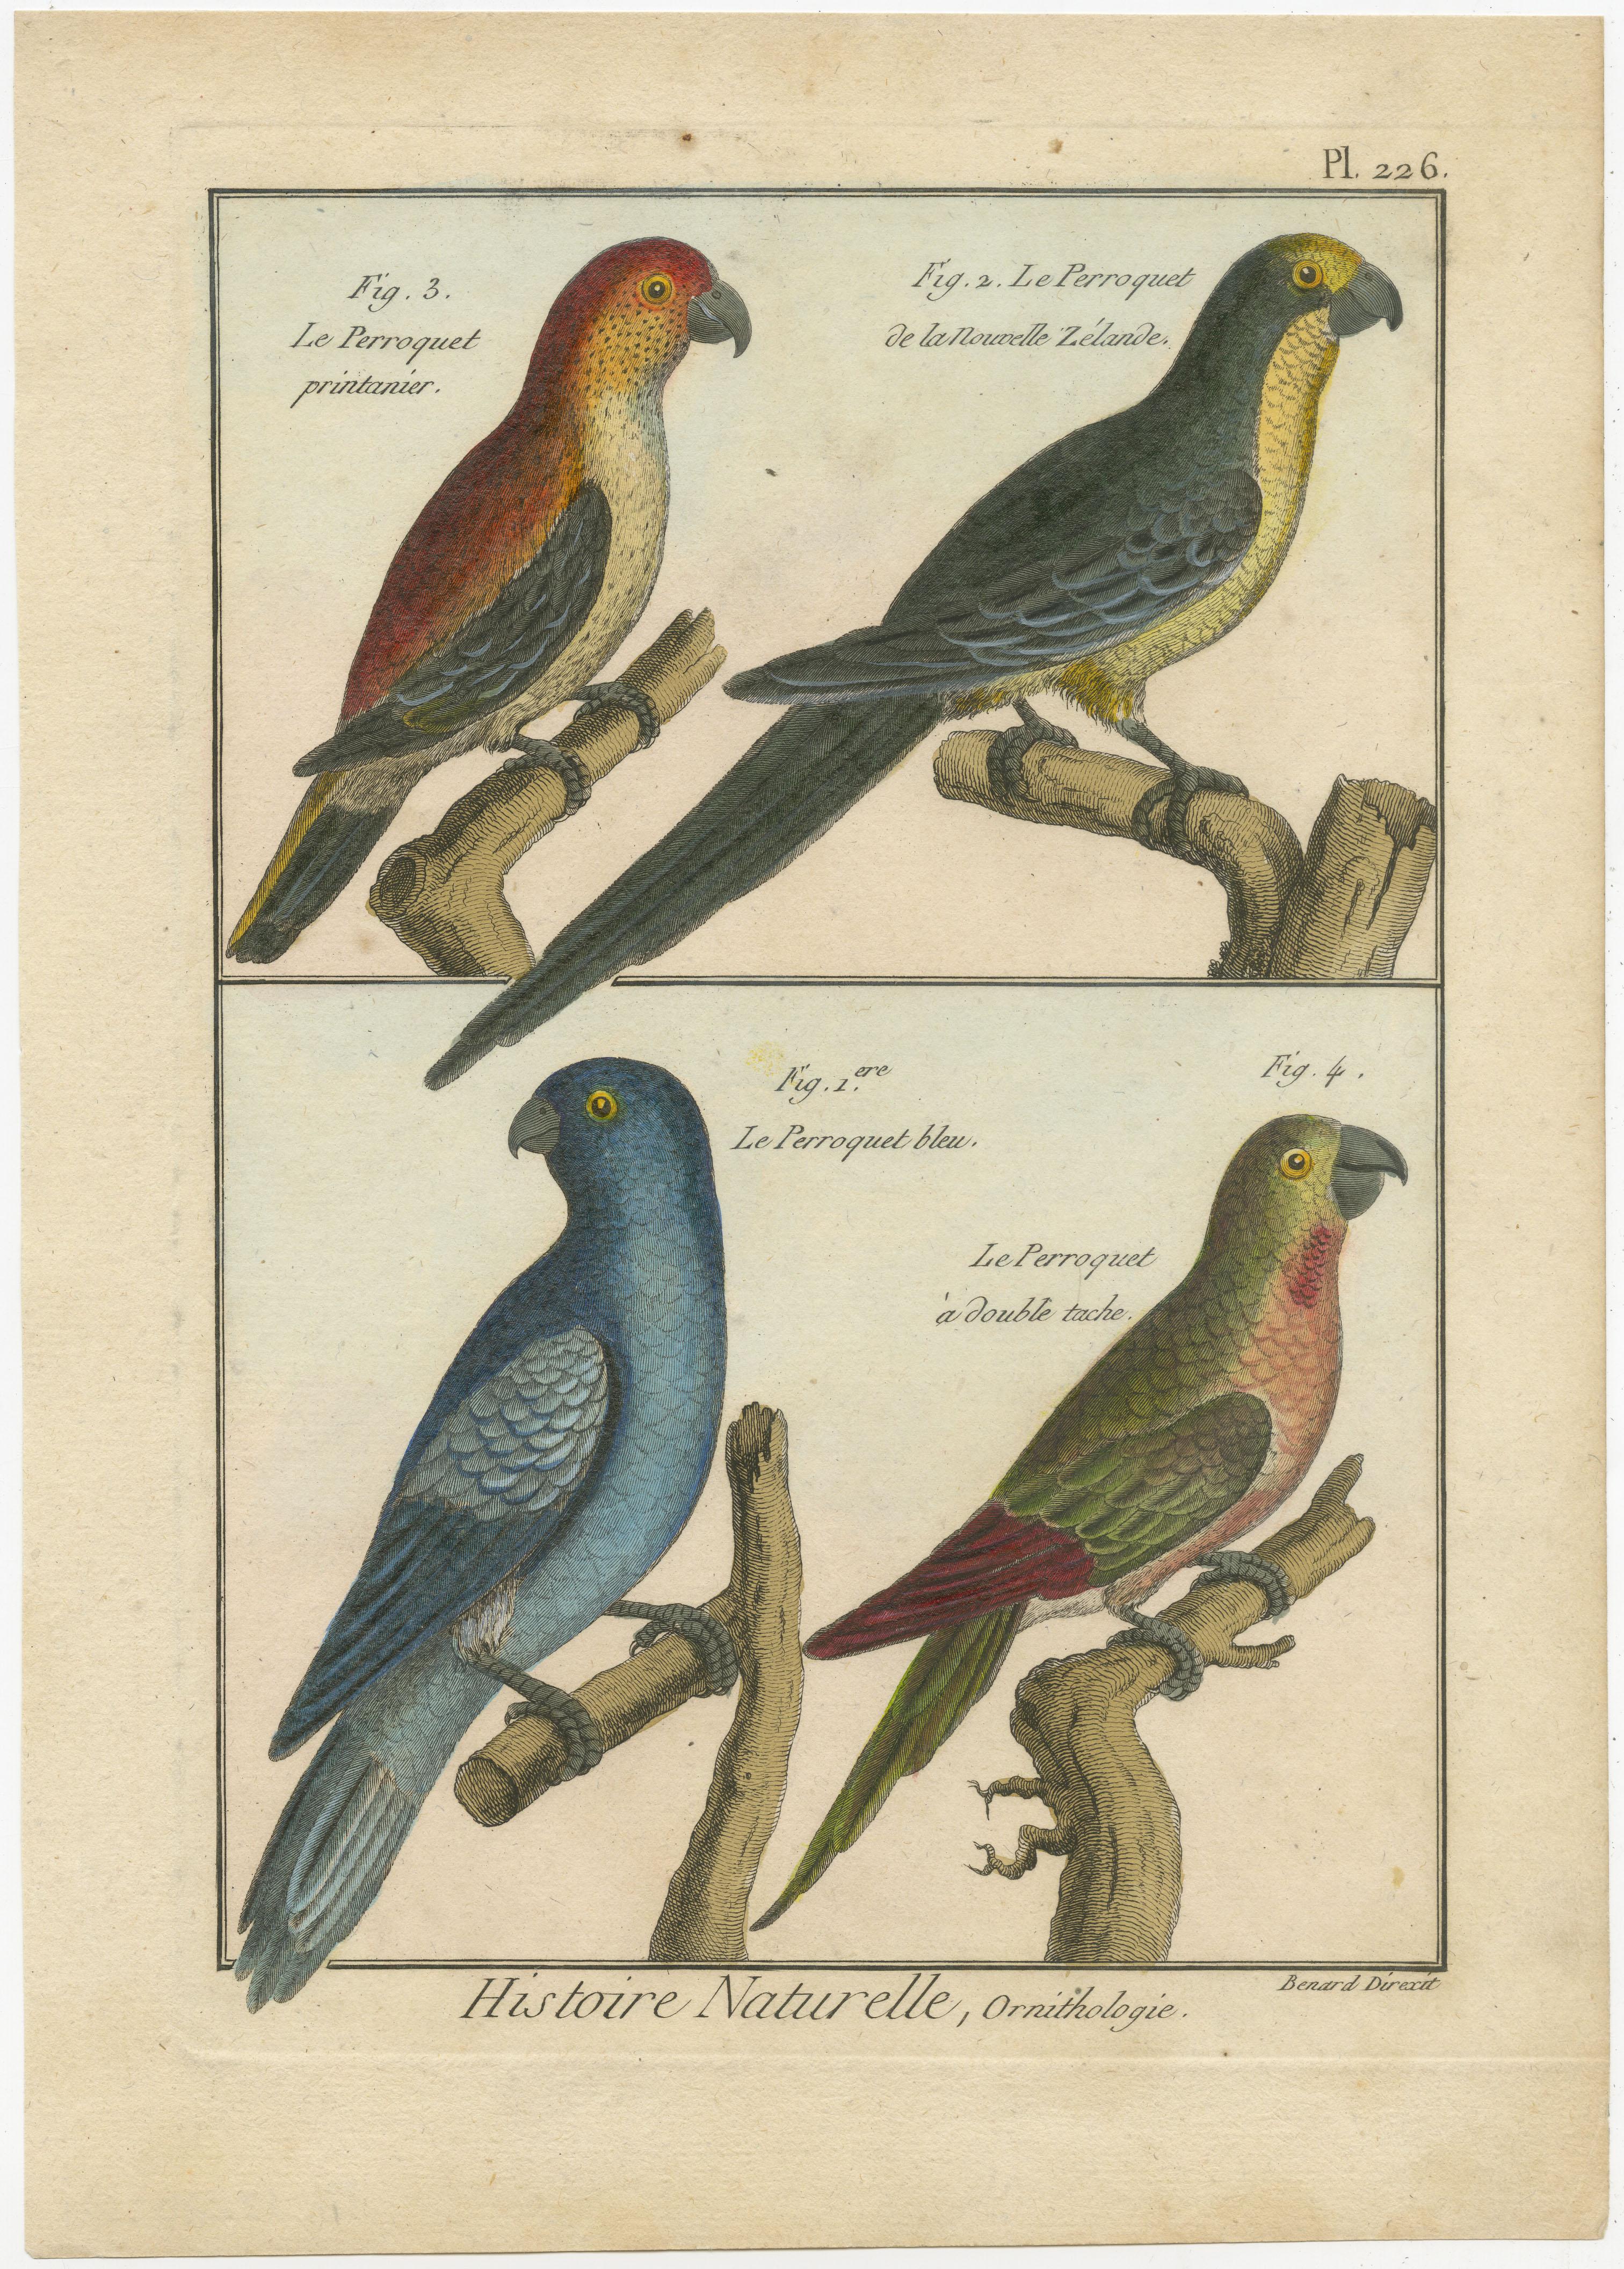 An authentic, perfect and bright, originally hand-colored, illustration of 4 Parrots on parchment paper (copper engraving). It has a fine shining because of the authenticly applied egg-yolk as varnish. The Artist is Robert Bernard (1792). The